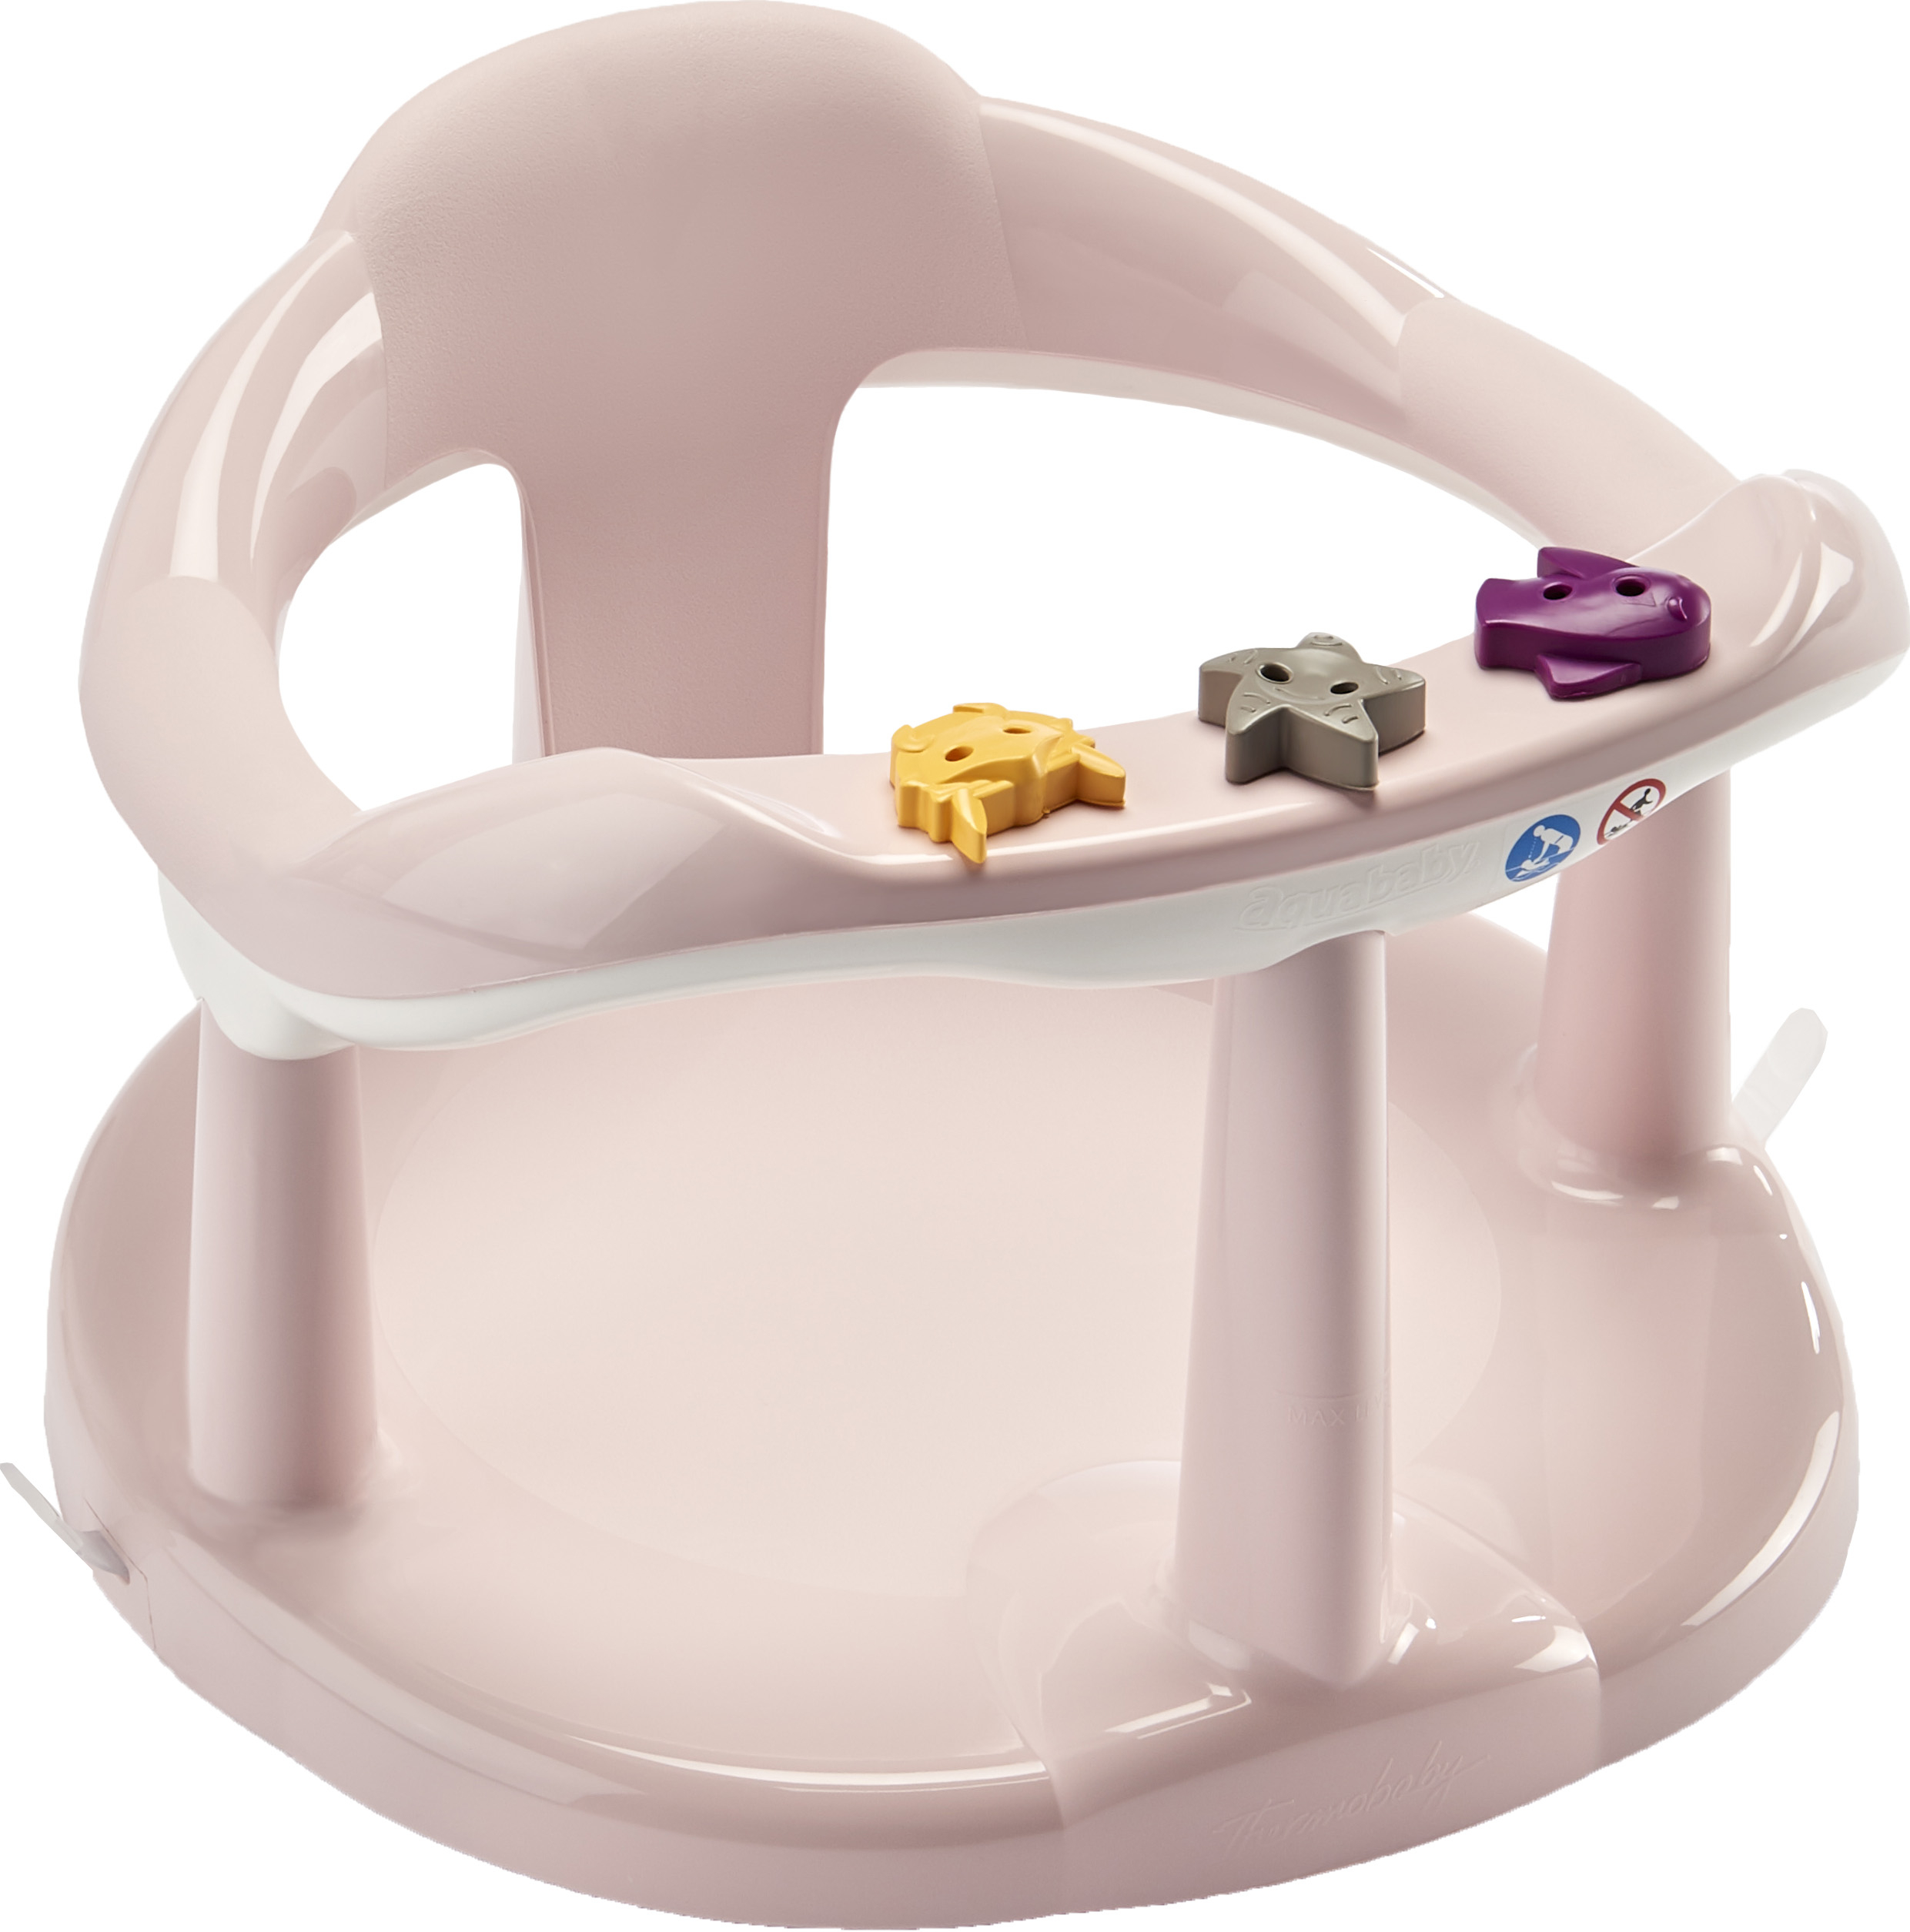 Siège de bain Thermobaby Aquababy, Rose Poudré